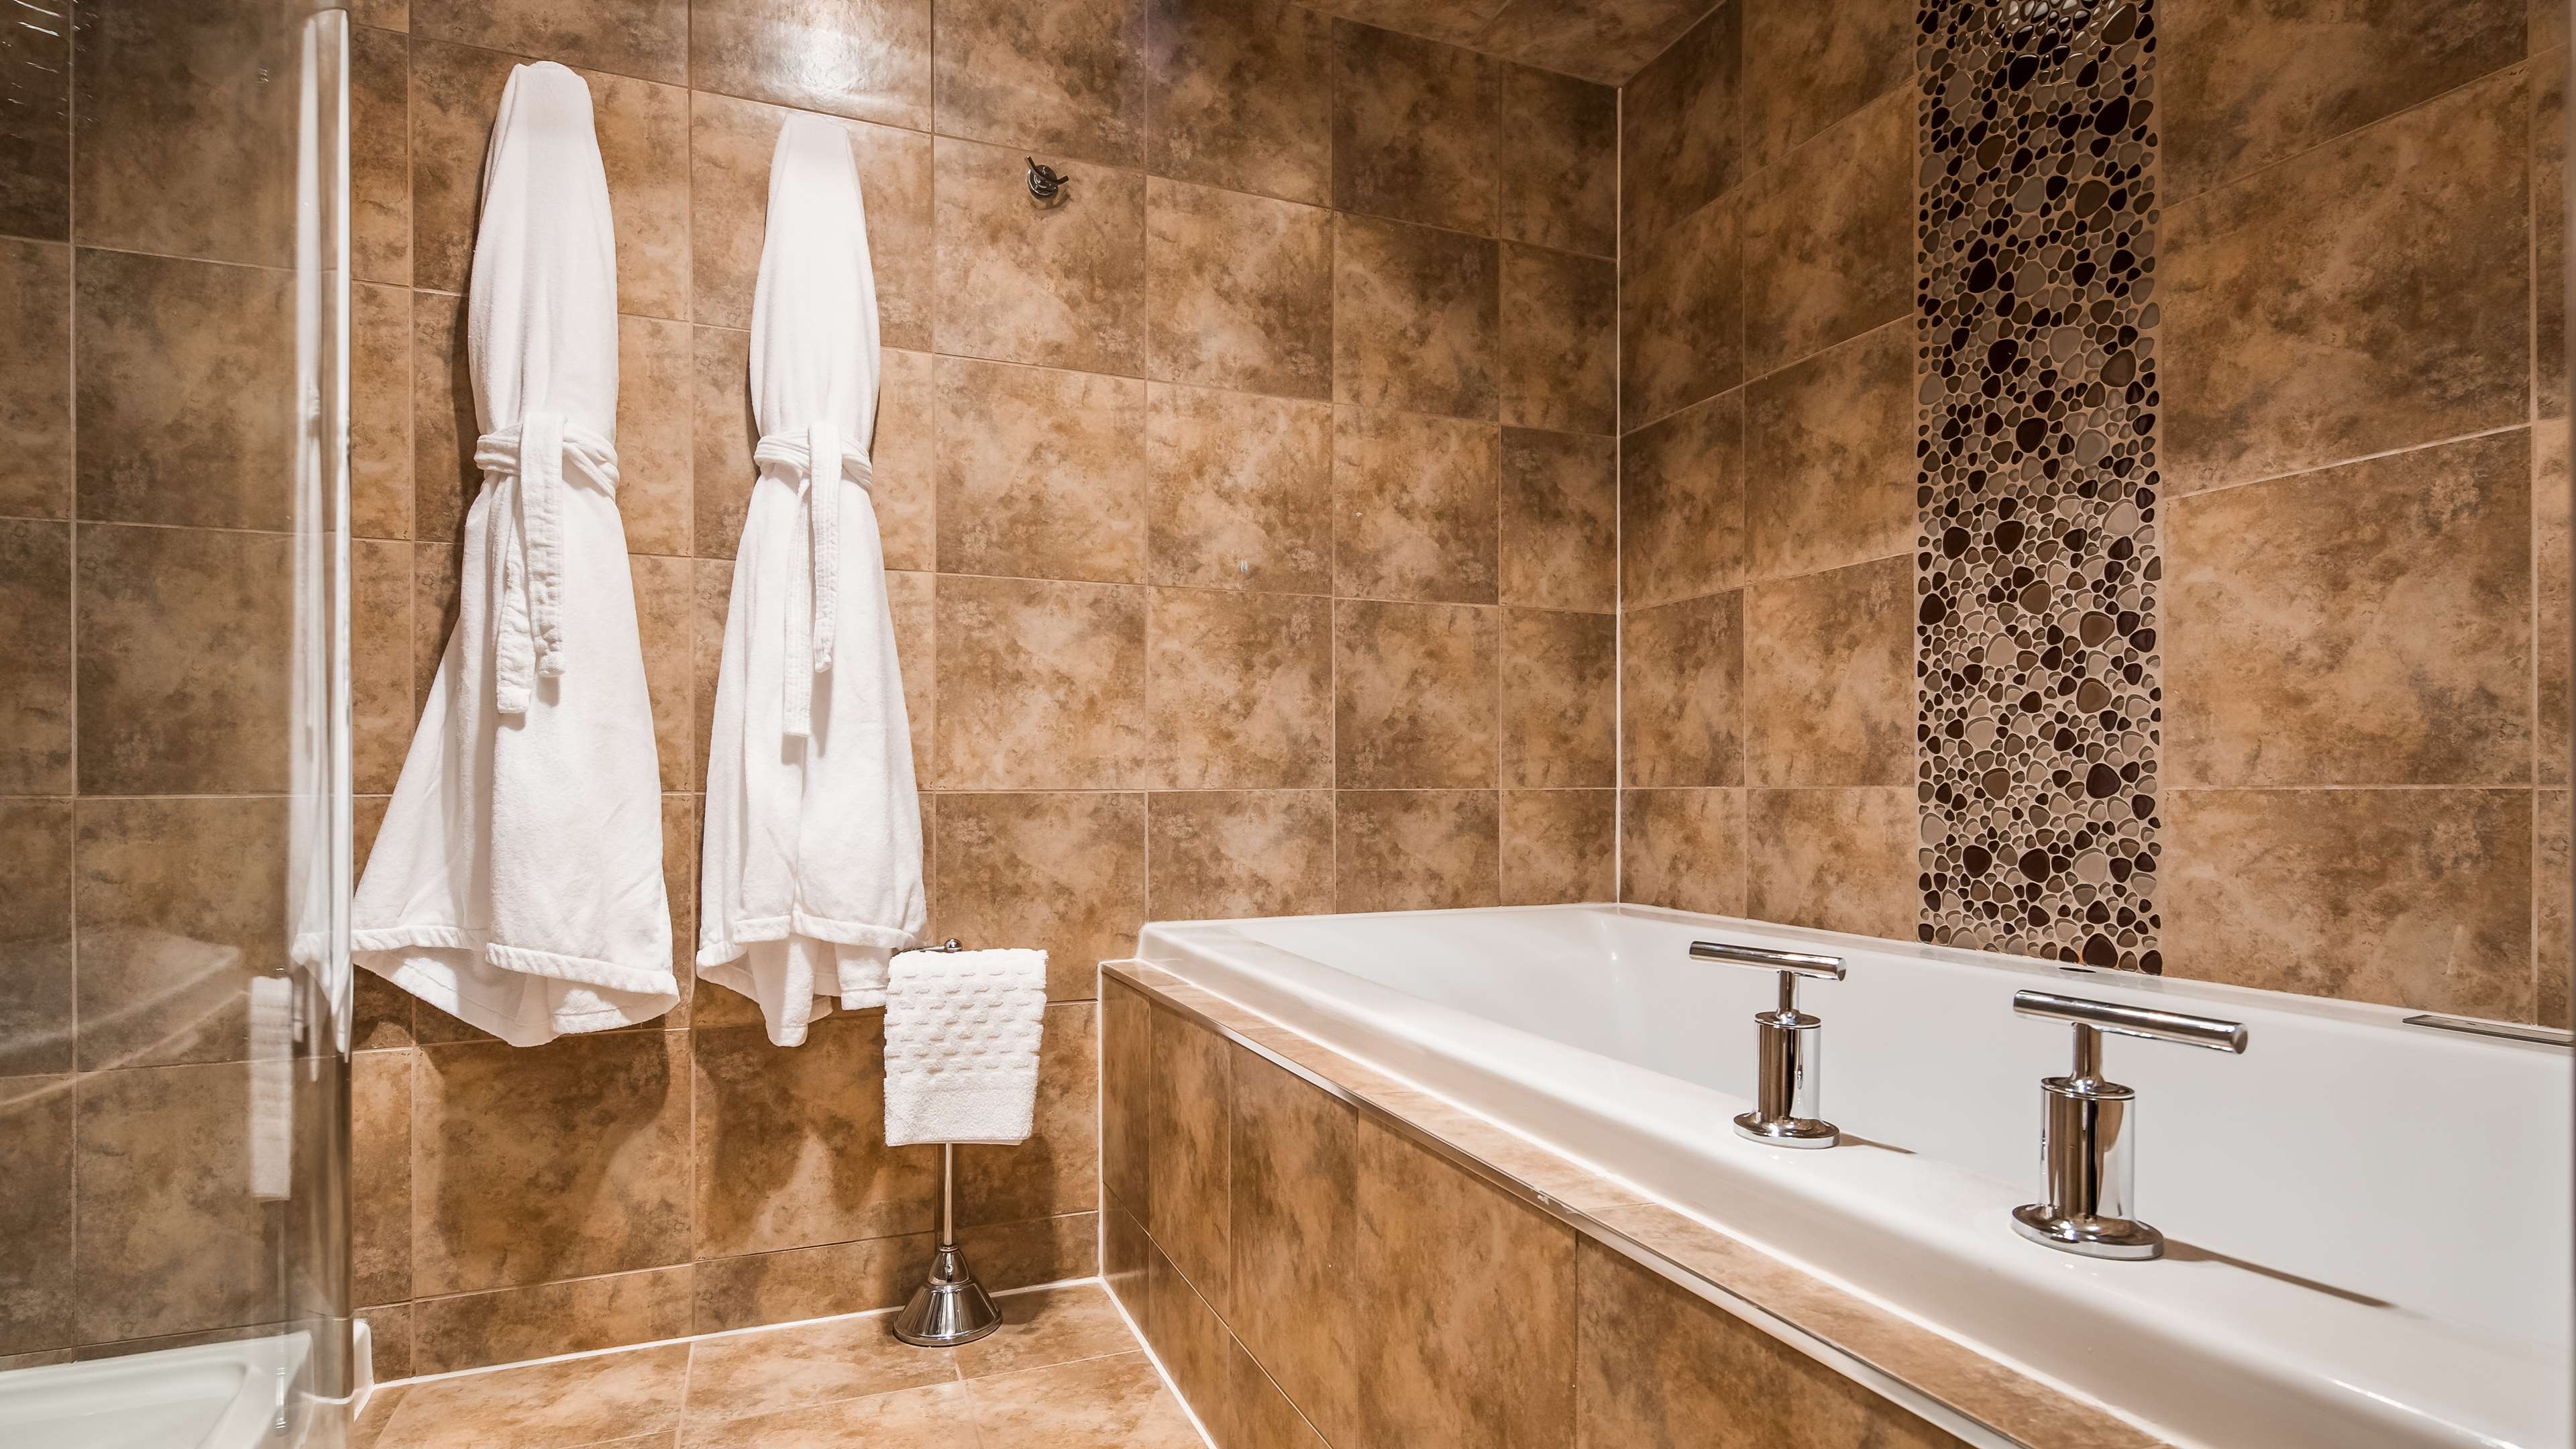 Air Jet Tub Suite Bathroom Best Western Plus Norwester Hotel & Conference Centre Thunder Bay (807)473-9123